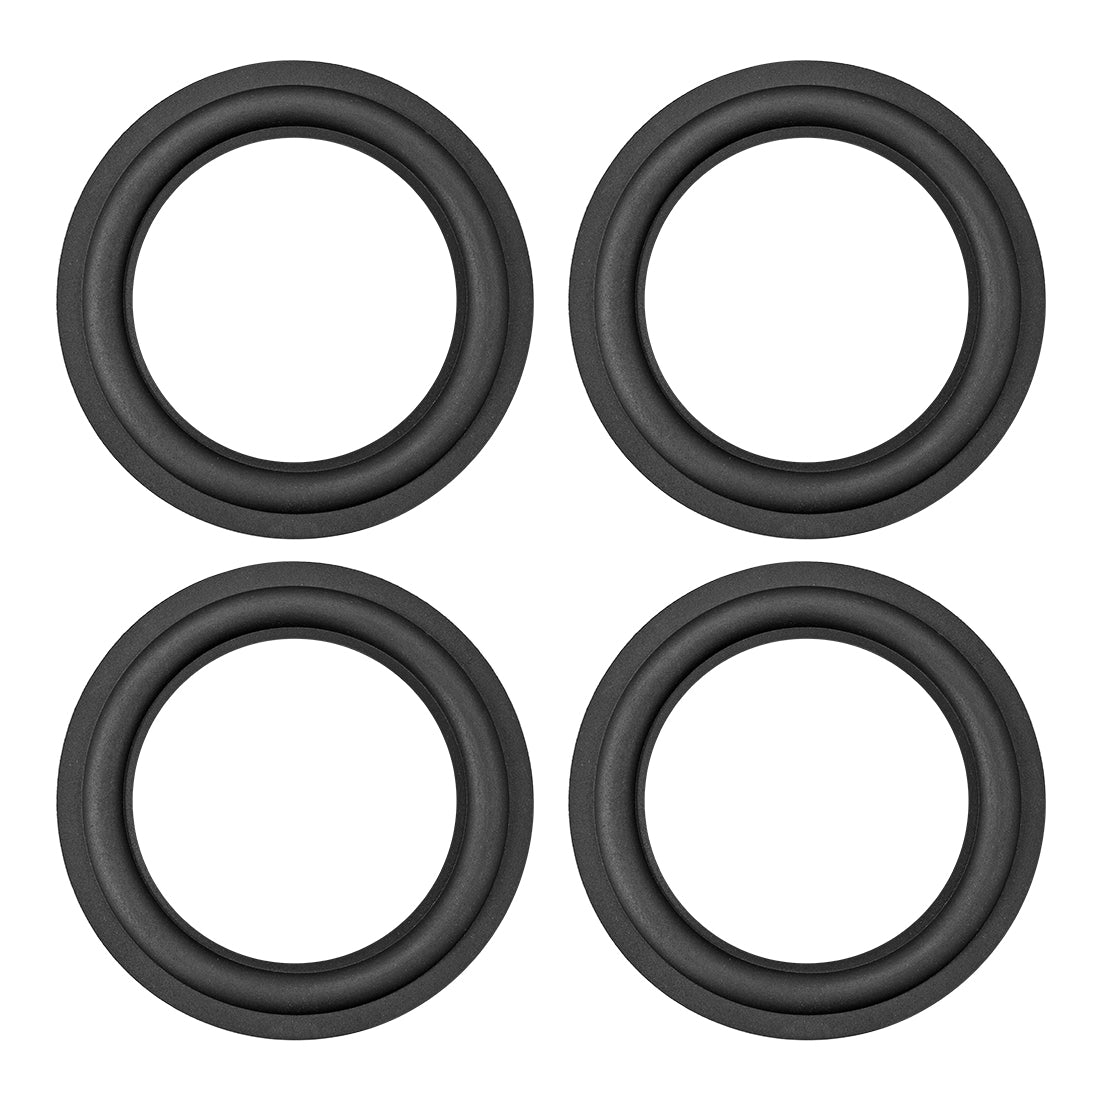 uxcell Uxcell 4.5" 4.5 Inch Rubber Edge Surround Rings Replacement Part for Repair or DIY 4pcs